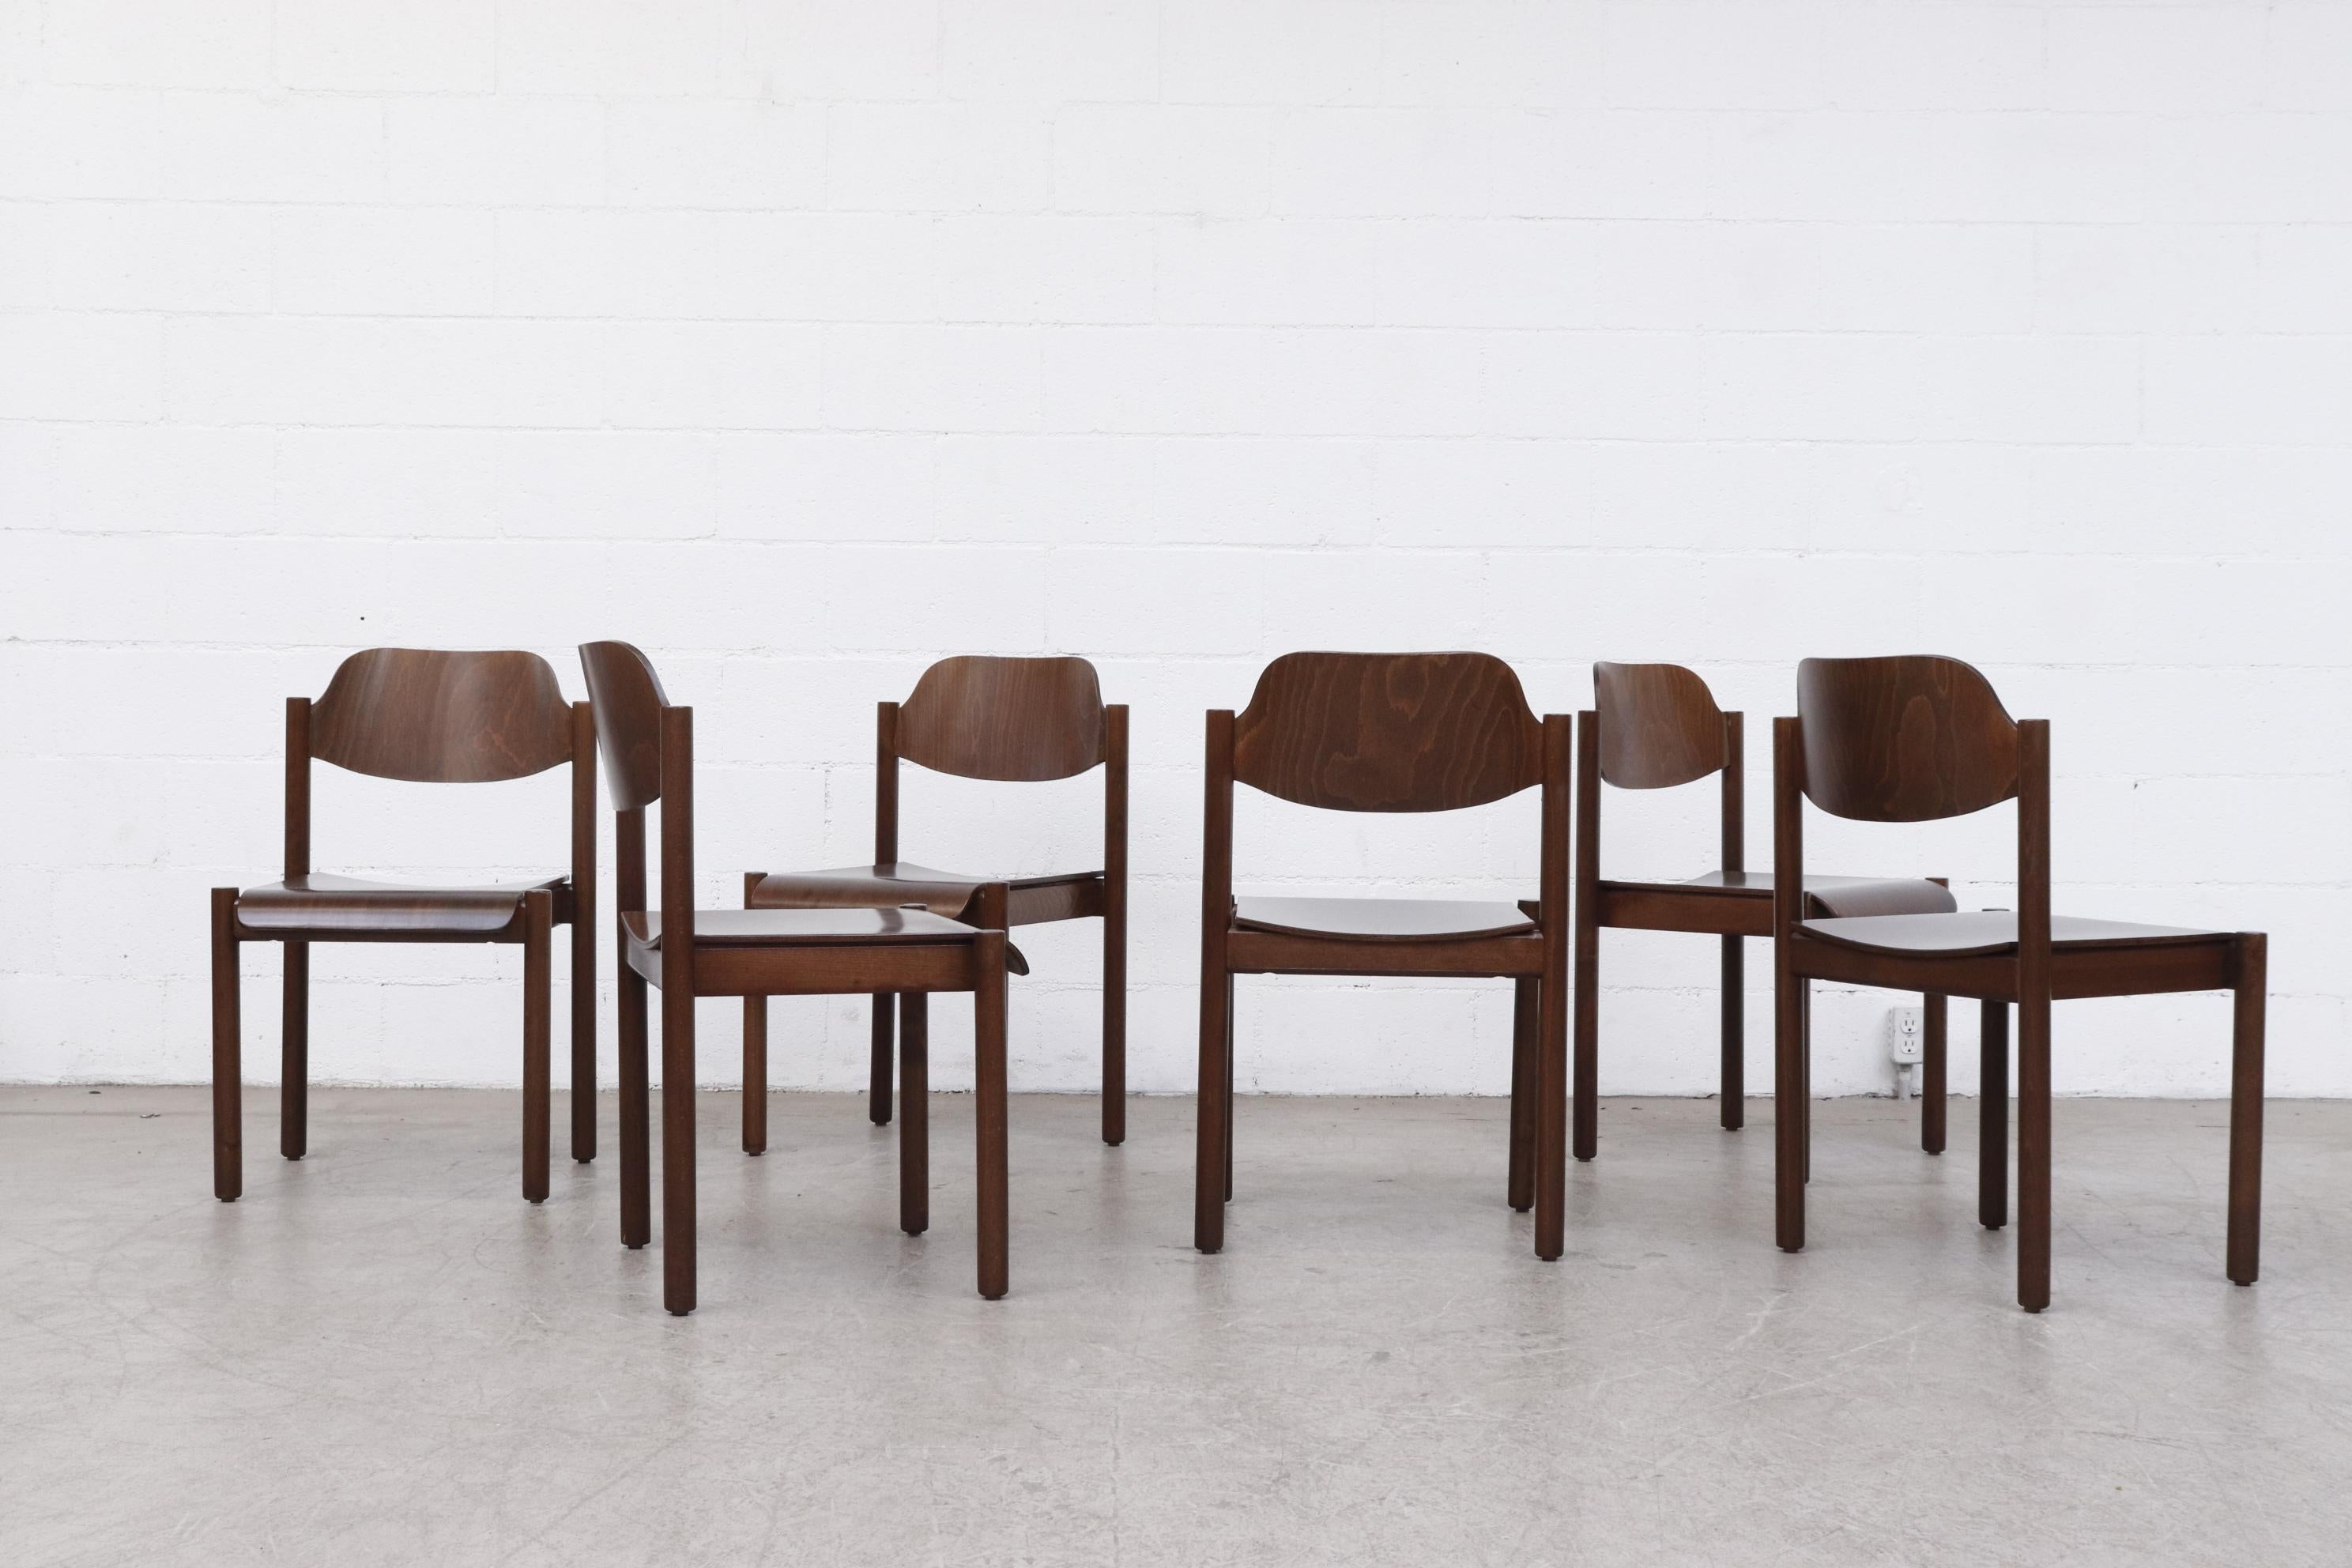 Late 20th Century Walnut Toned Vico Magistretti Style Stacking Chairs